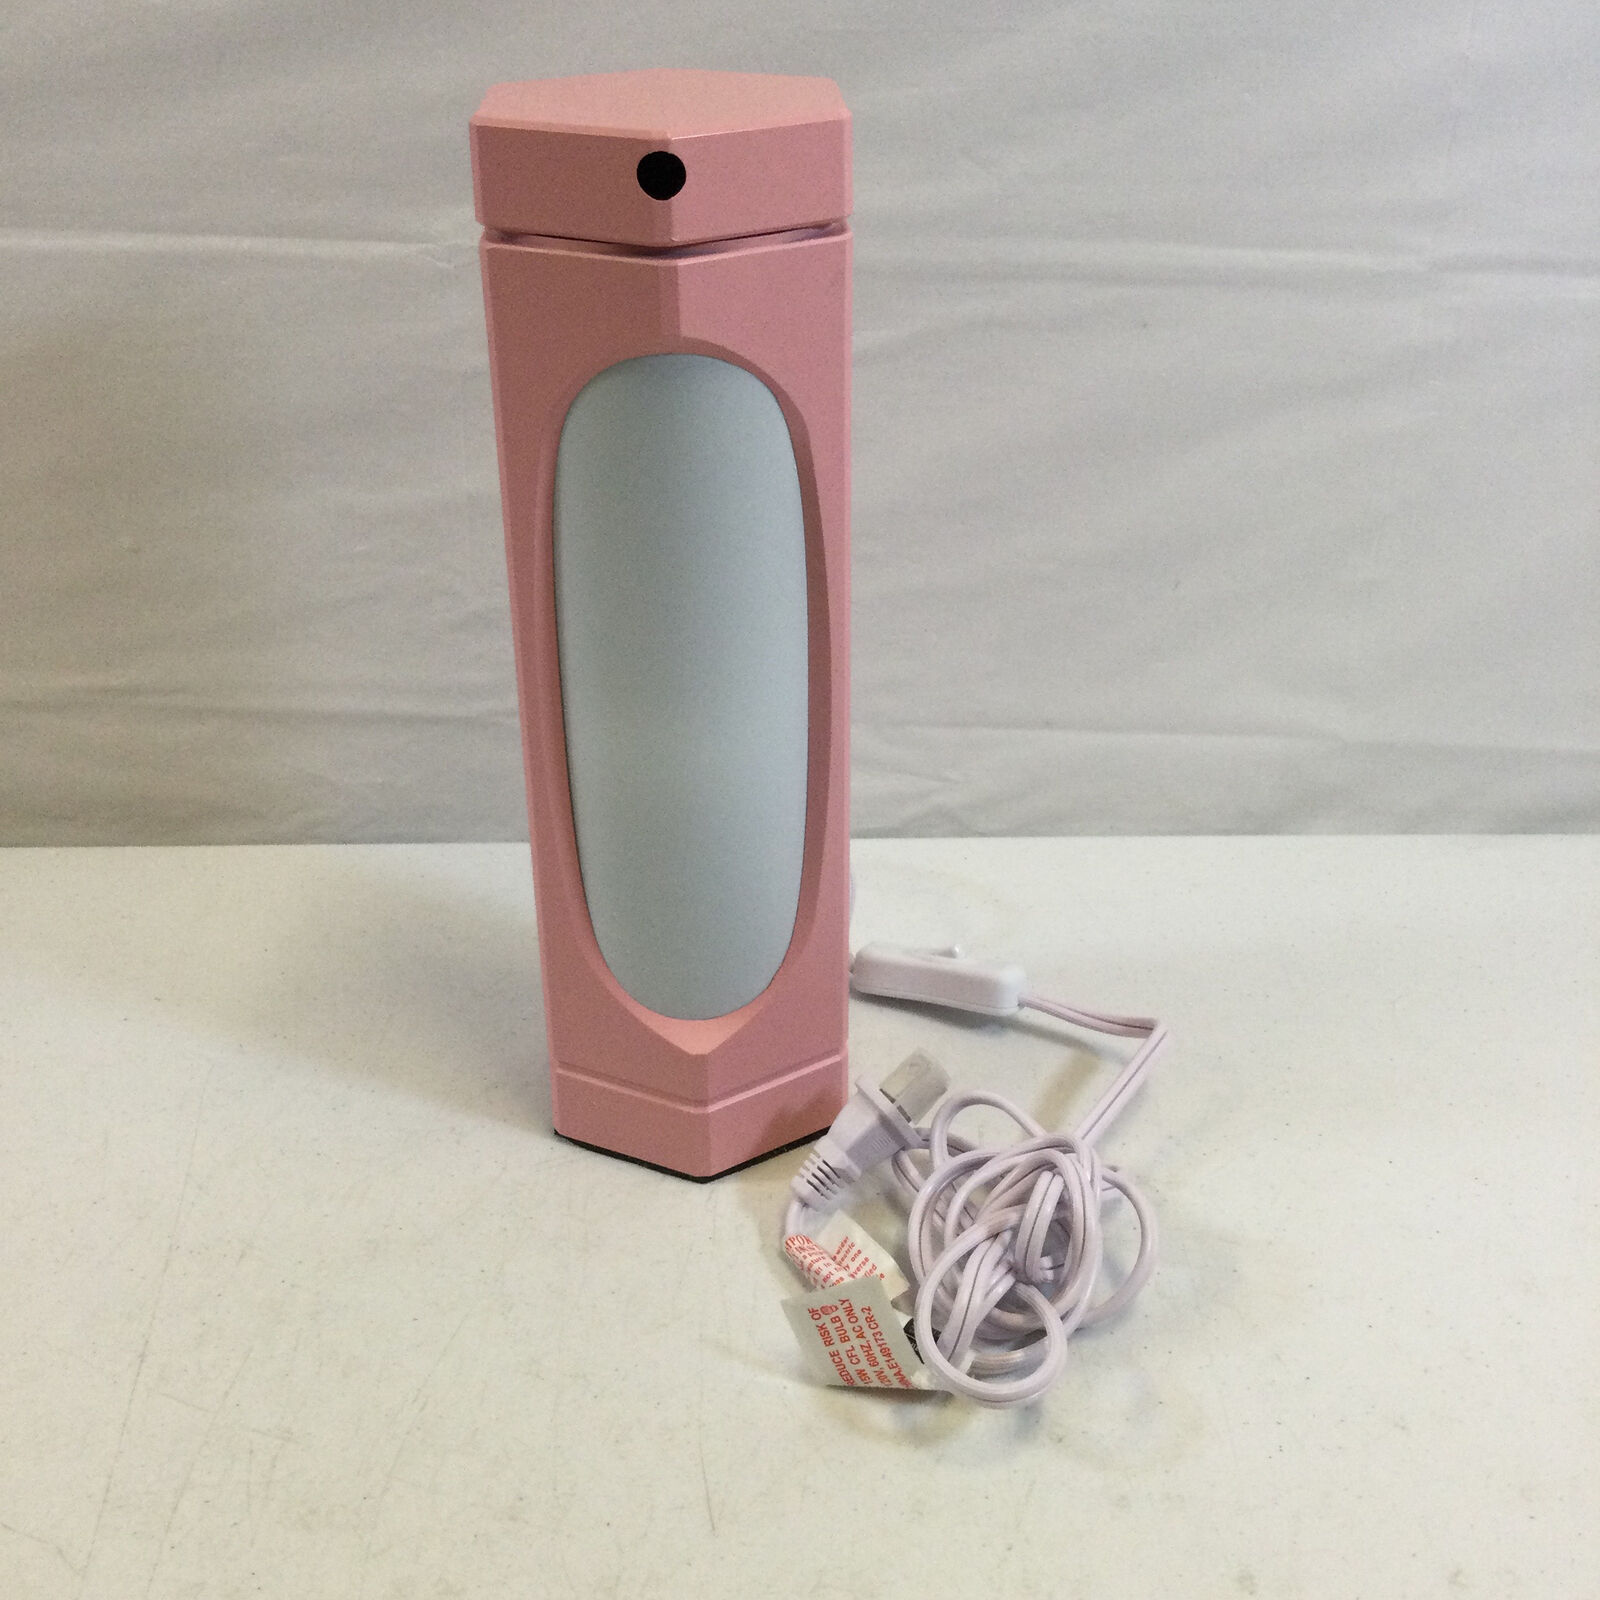 Kosher Lamp Pink Corded Electric Portable Max Kosher Lamp For Shabbos Used